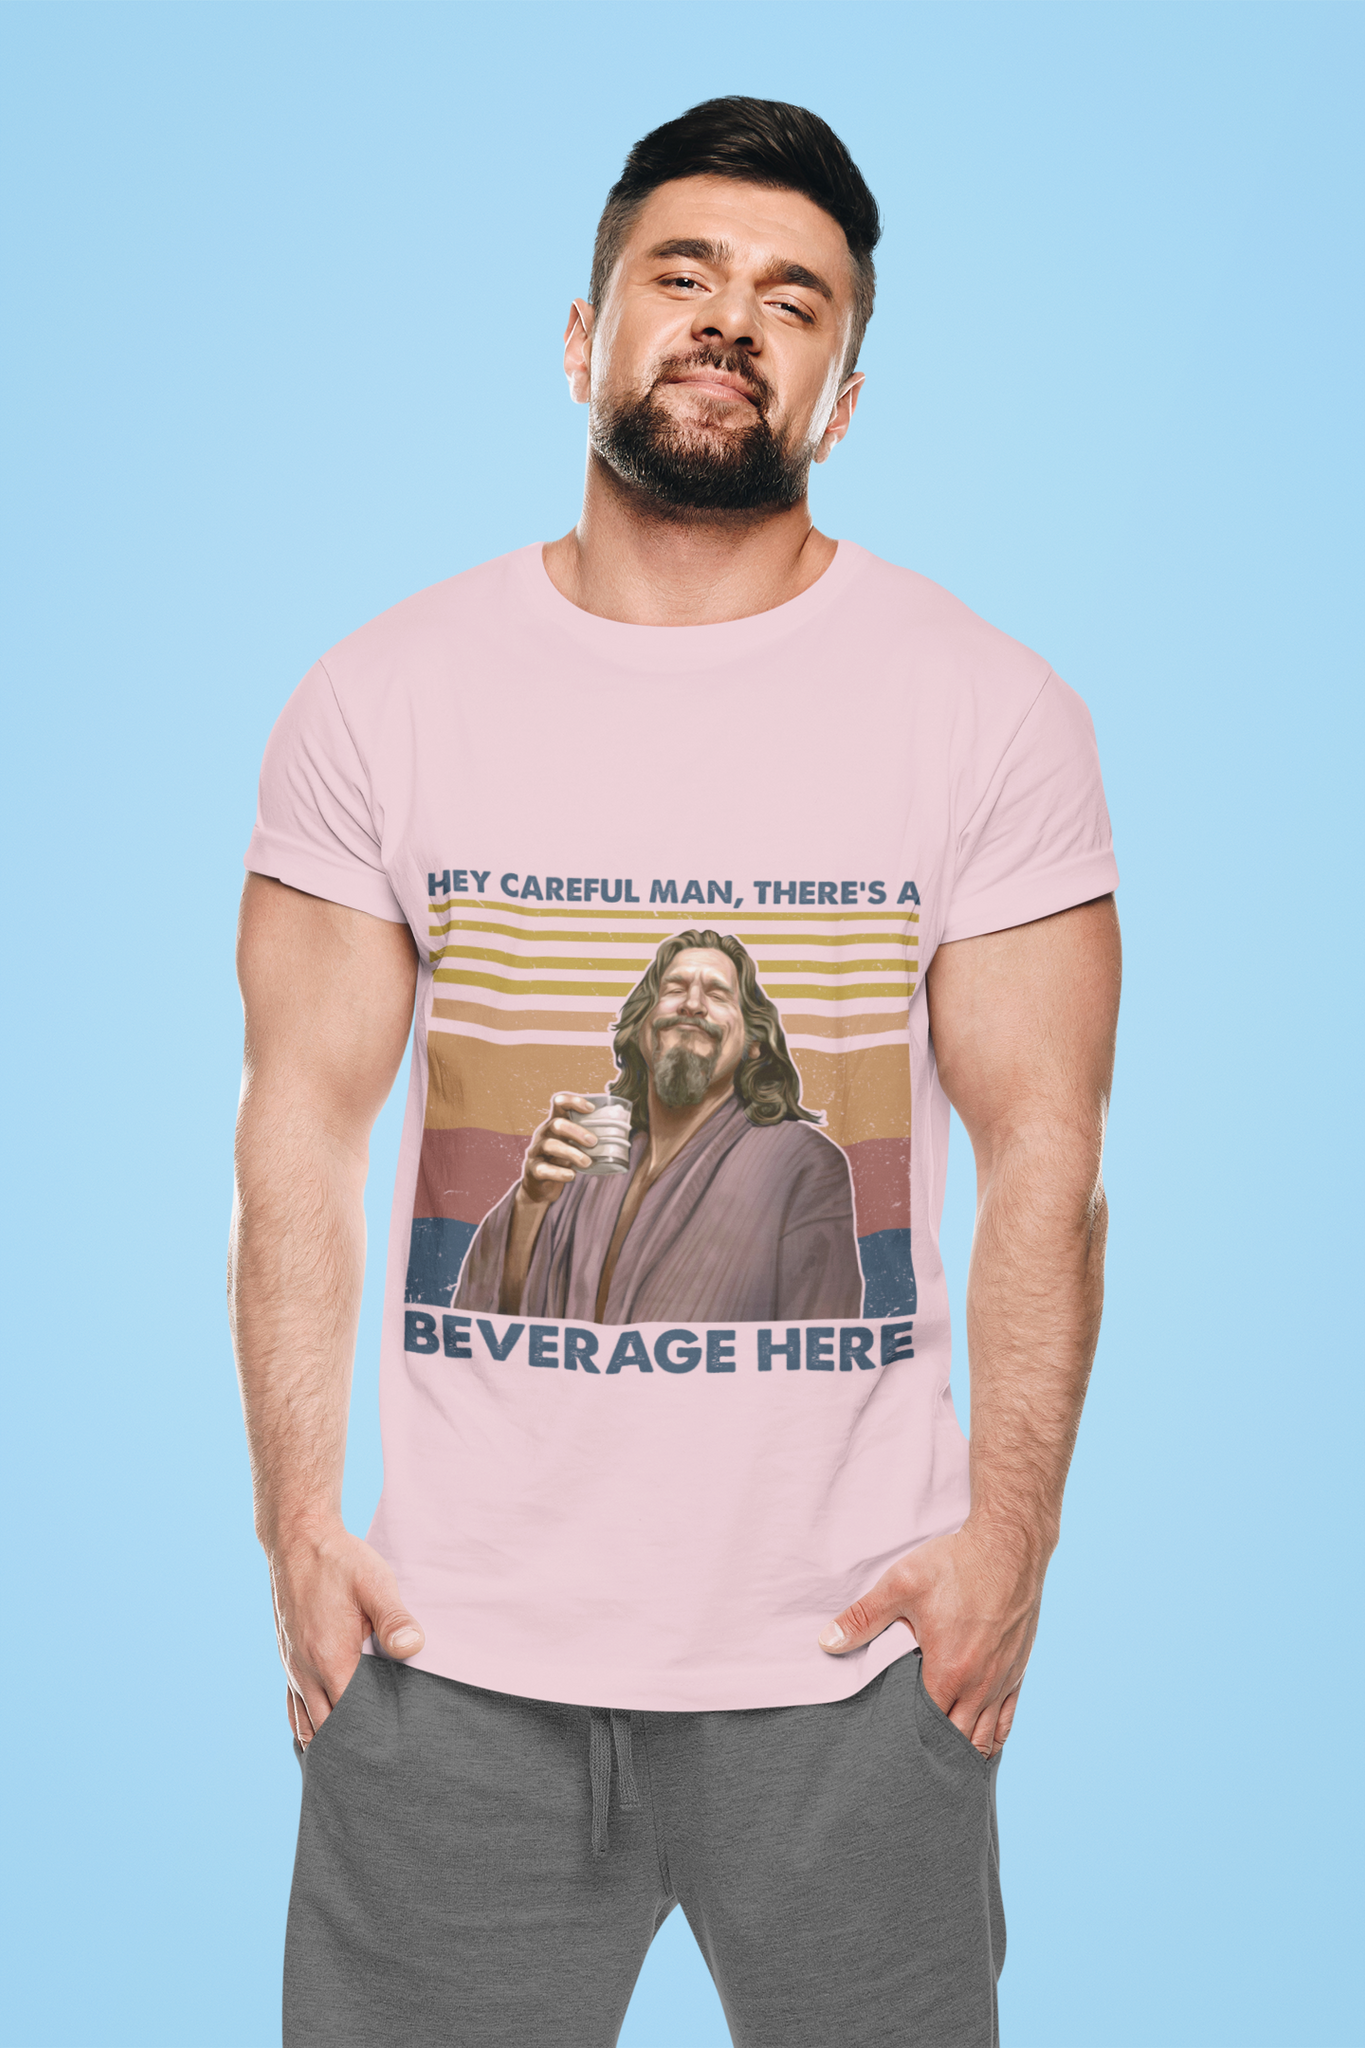 The Big Lebowski Vintage Tshirt, Hey Careful Man Theres A Beverage Here Shirt, The Dude T Shirt